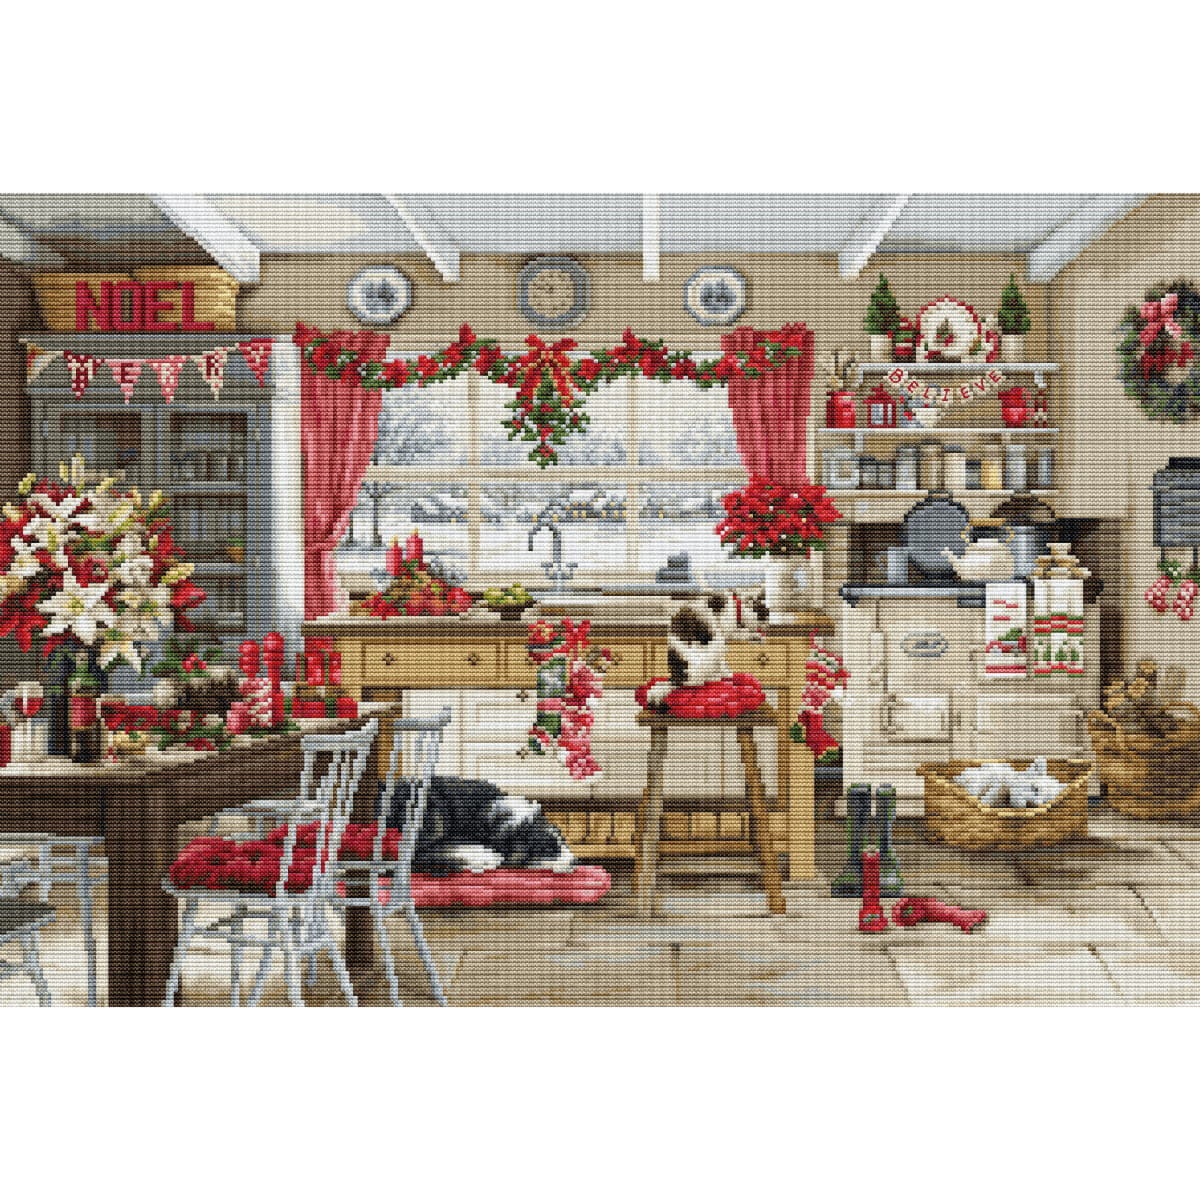 A cozy kitchen is festively decorated for Christmas. A...